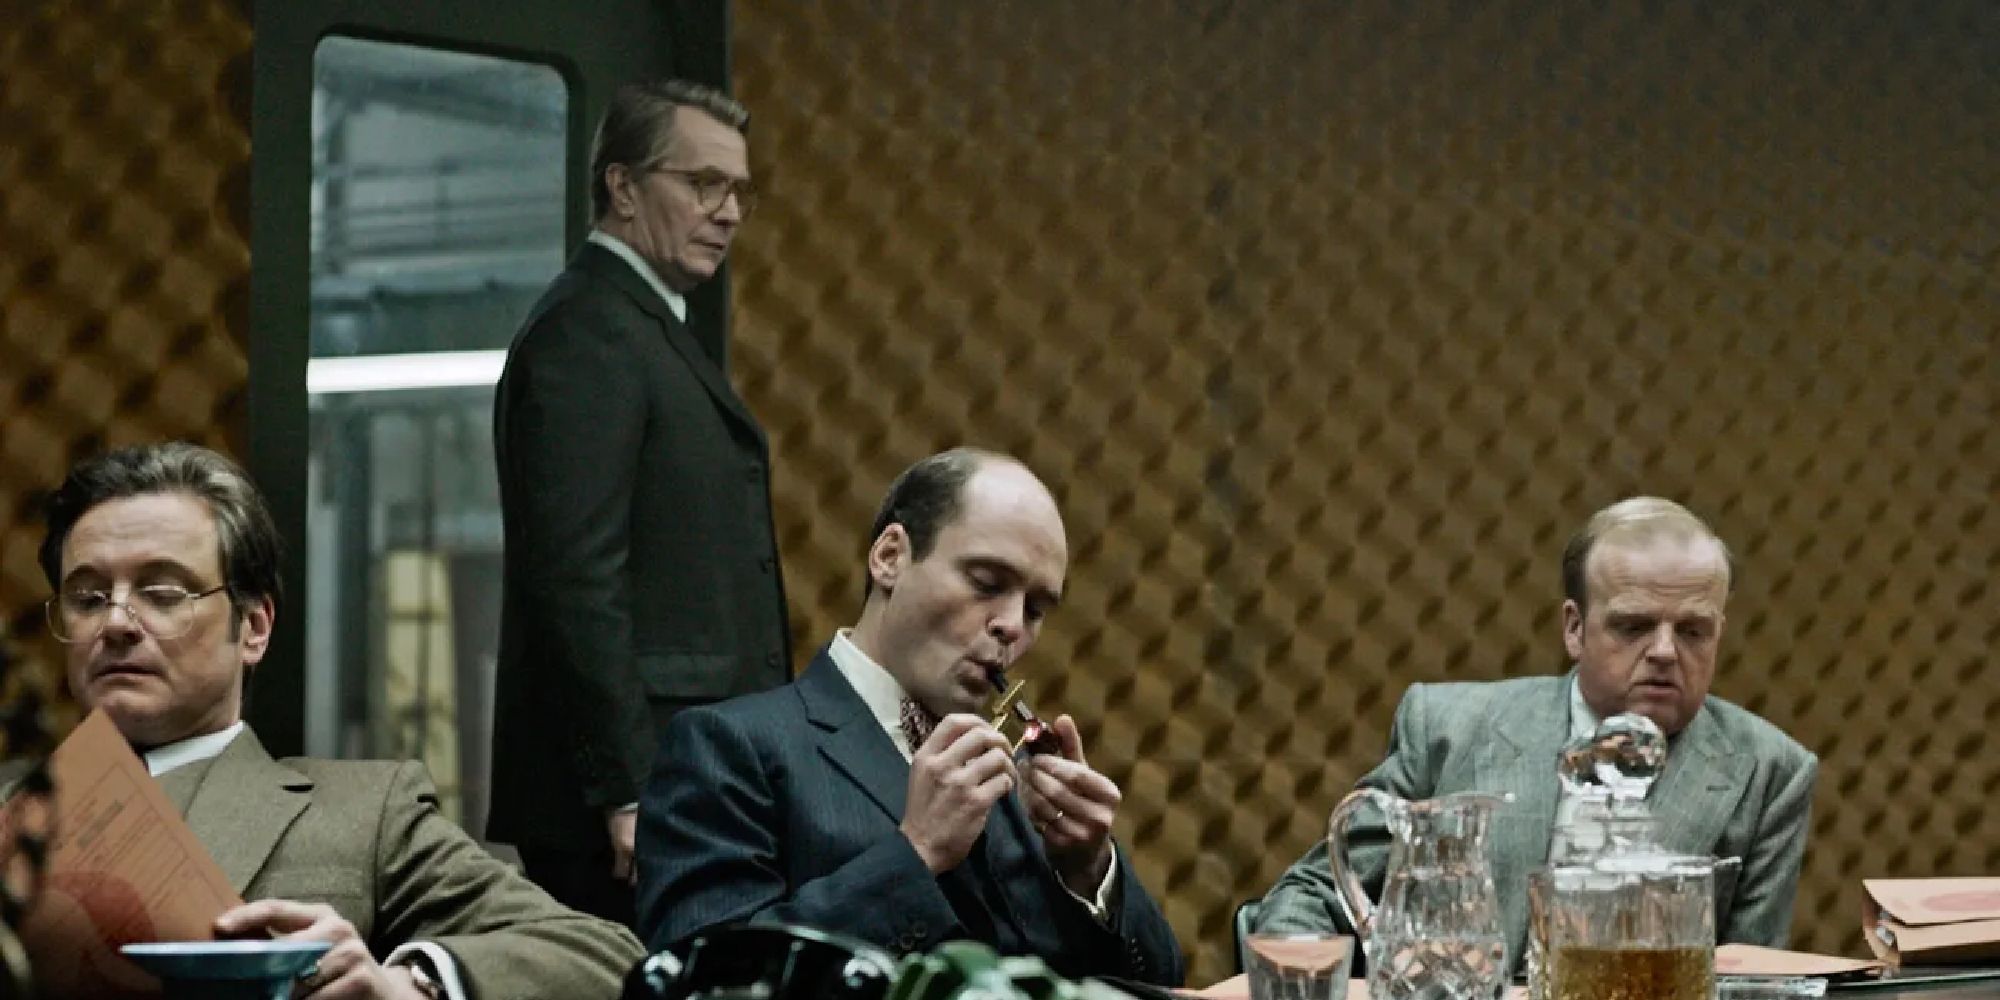 From left to right_ Colin Firth, Gary Oldman, David Dencik, and Toby Jones in Tinker Tailor Soldier Spy